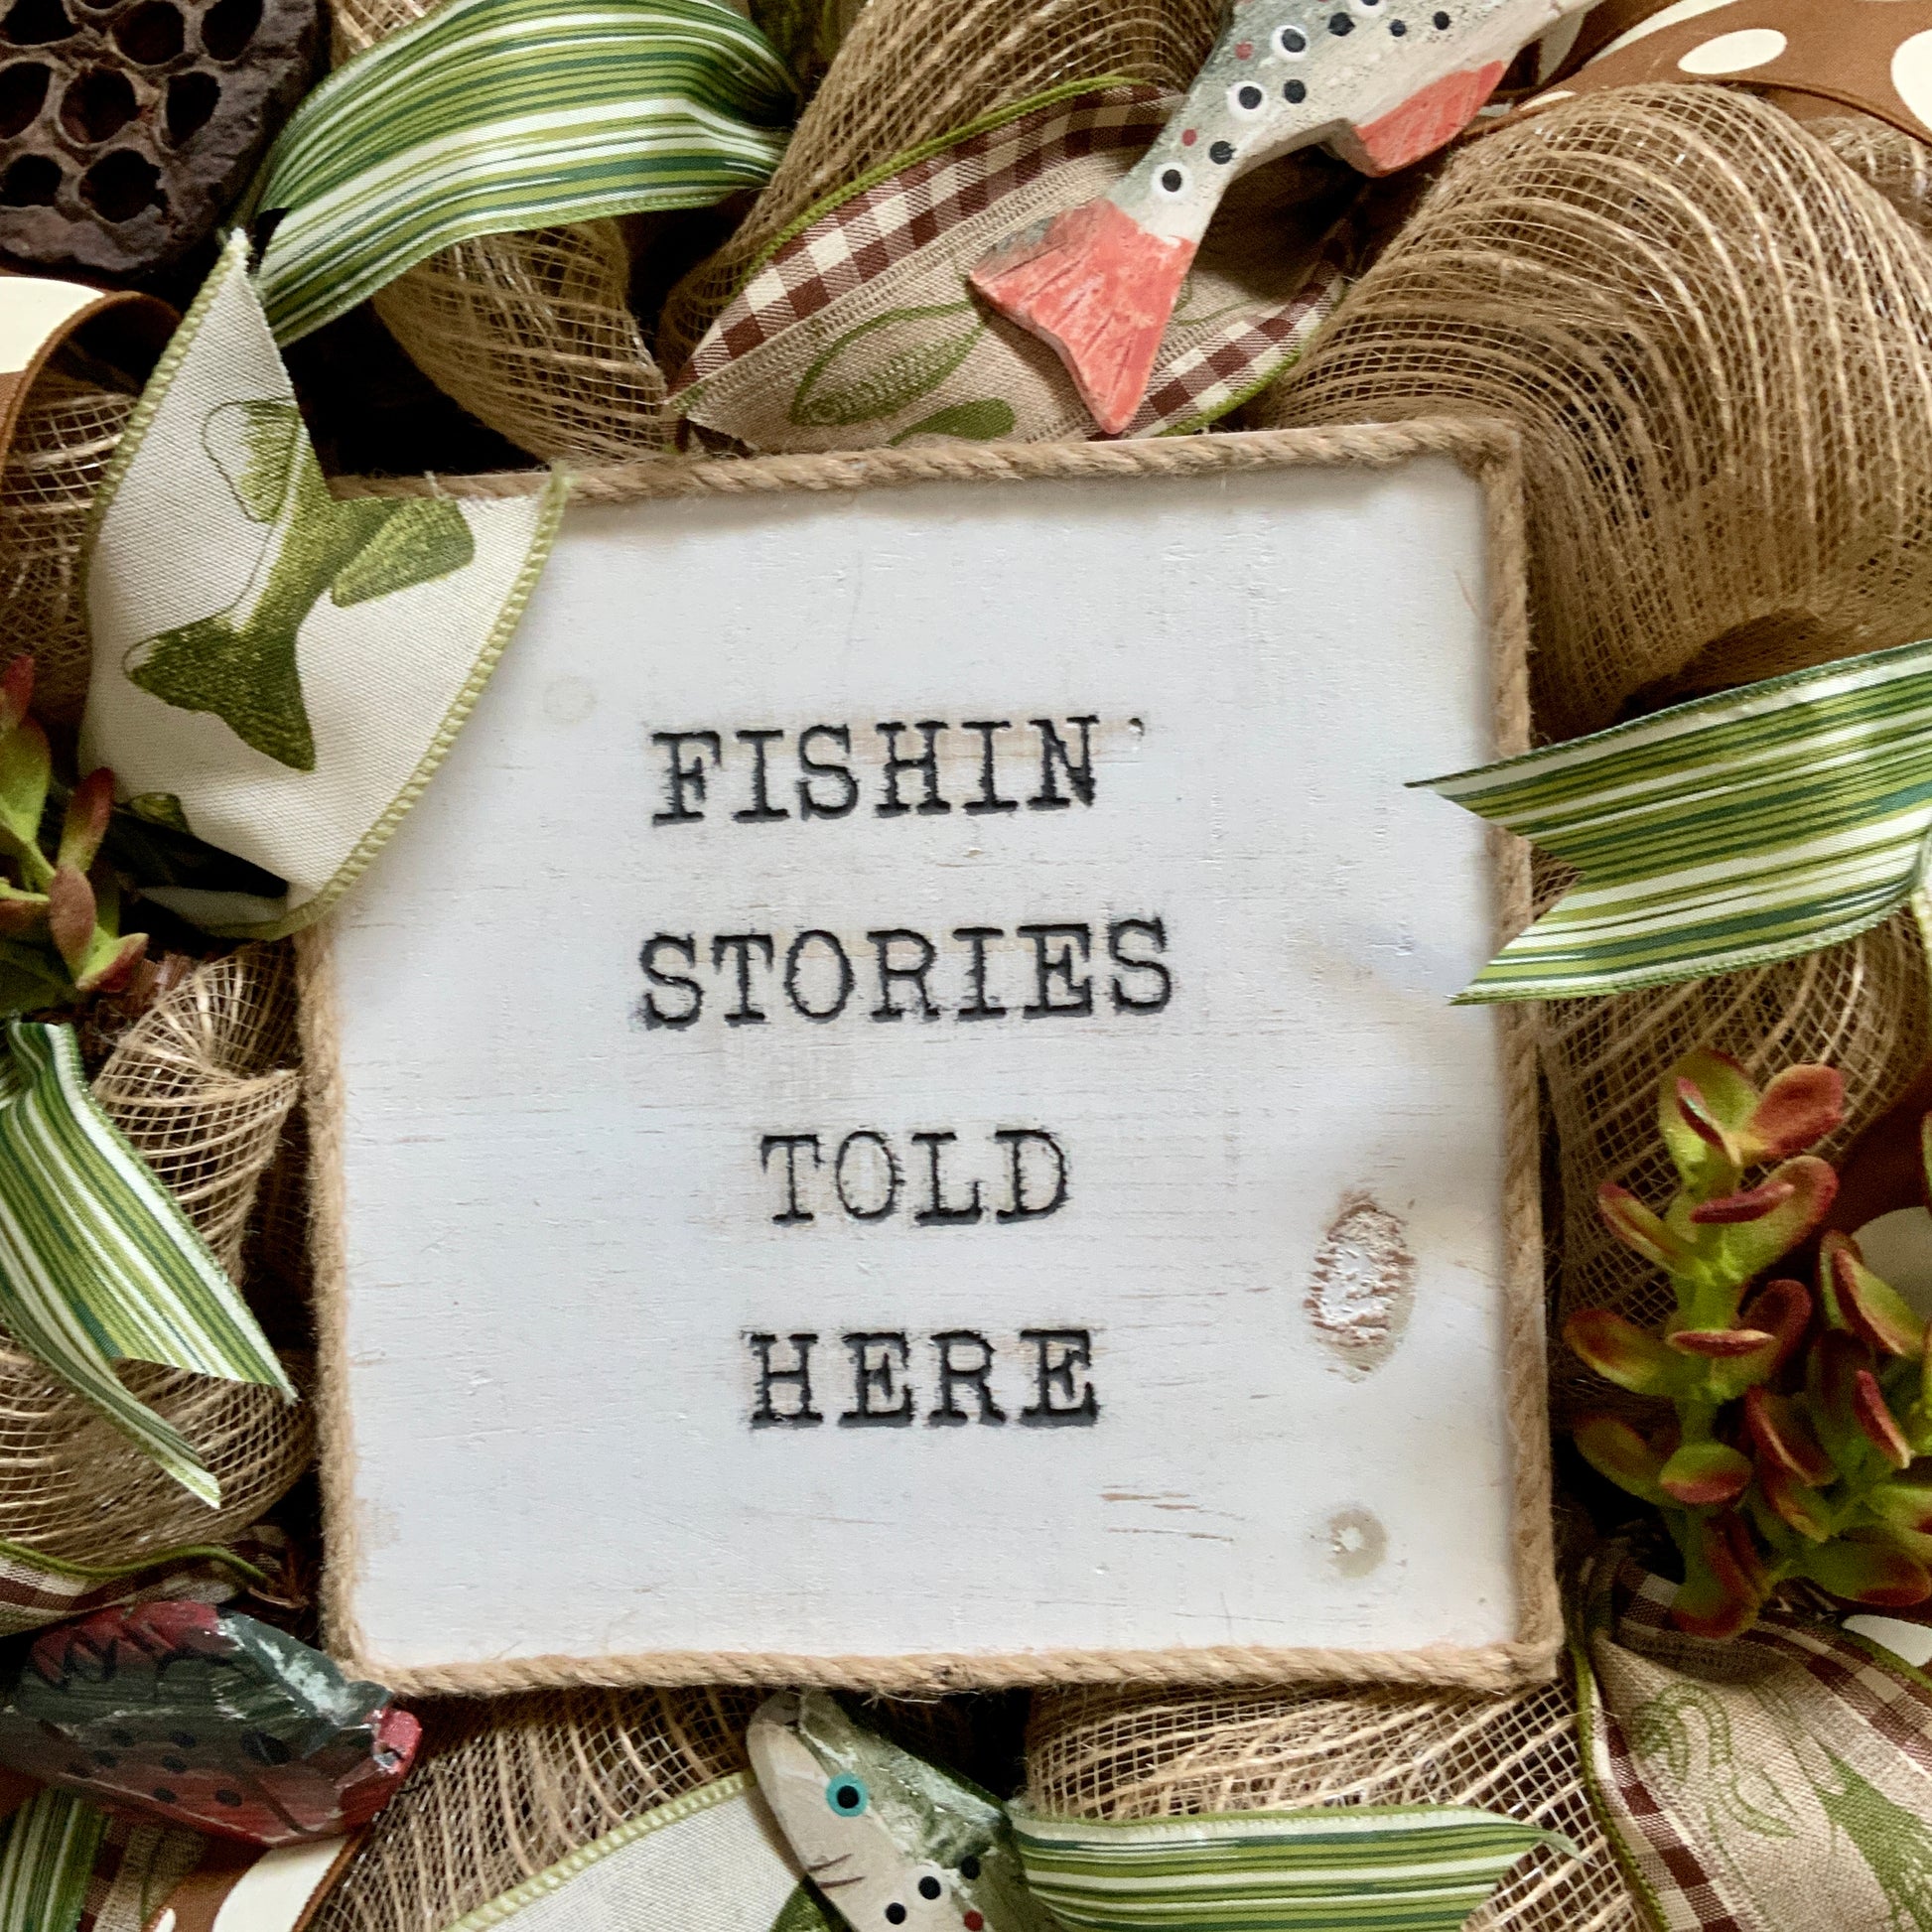 Gone Fishing - Rustic Decor for Outdoor Enthusiasts - Ideal Gift